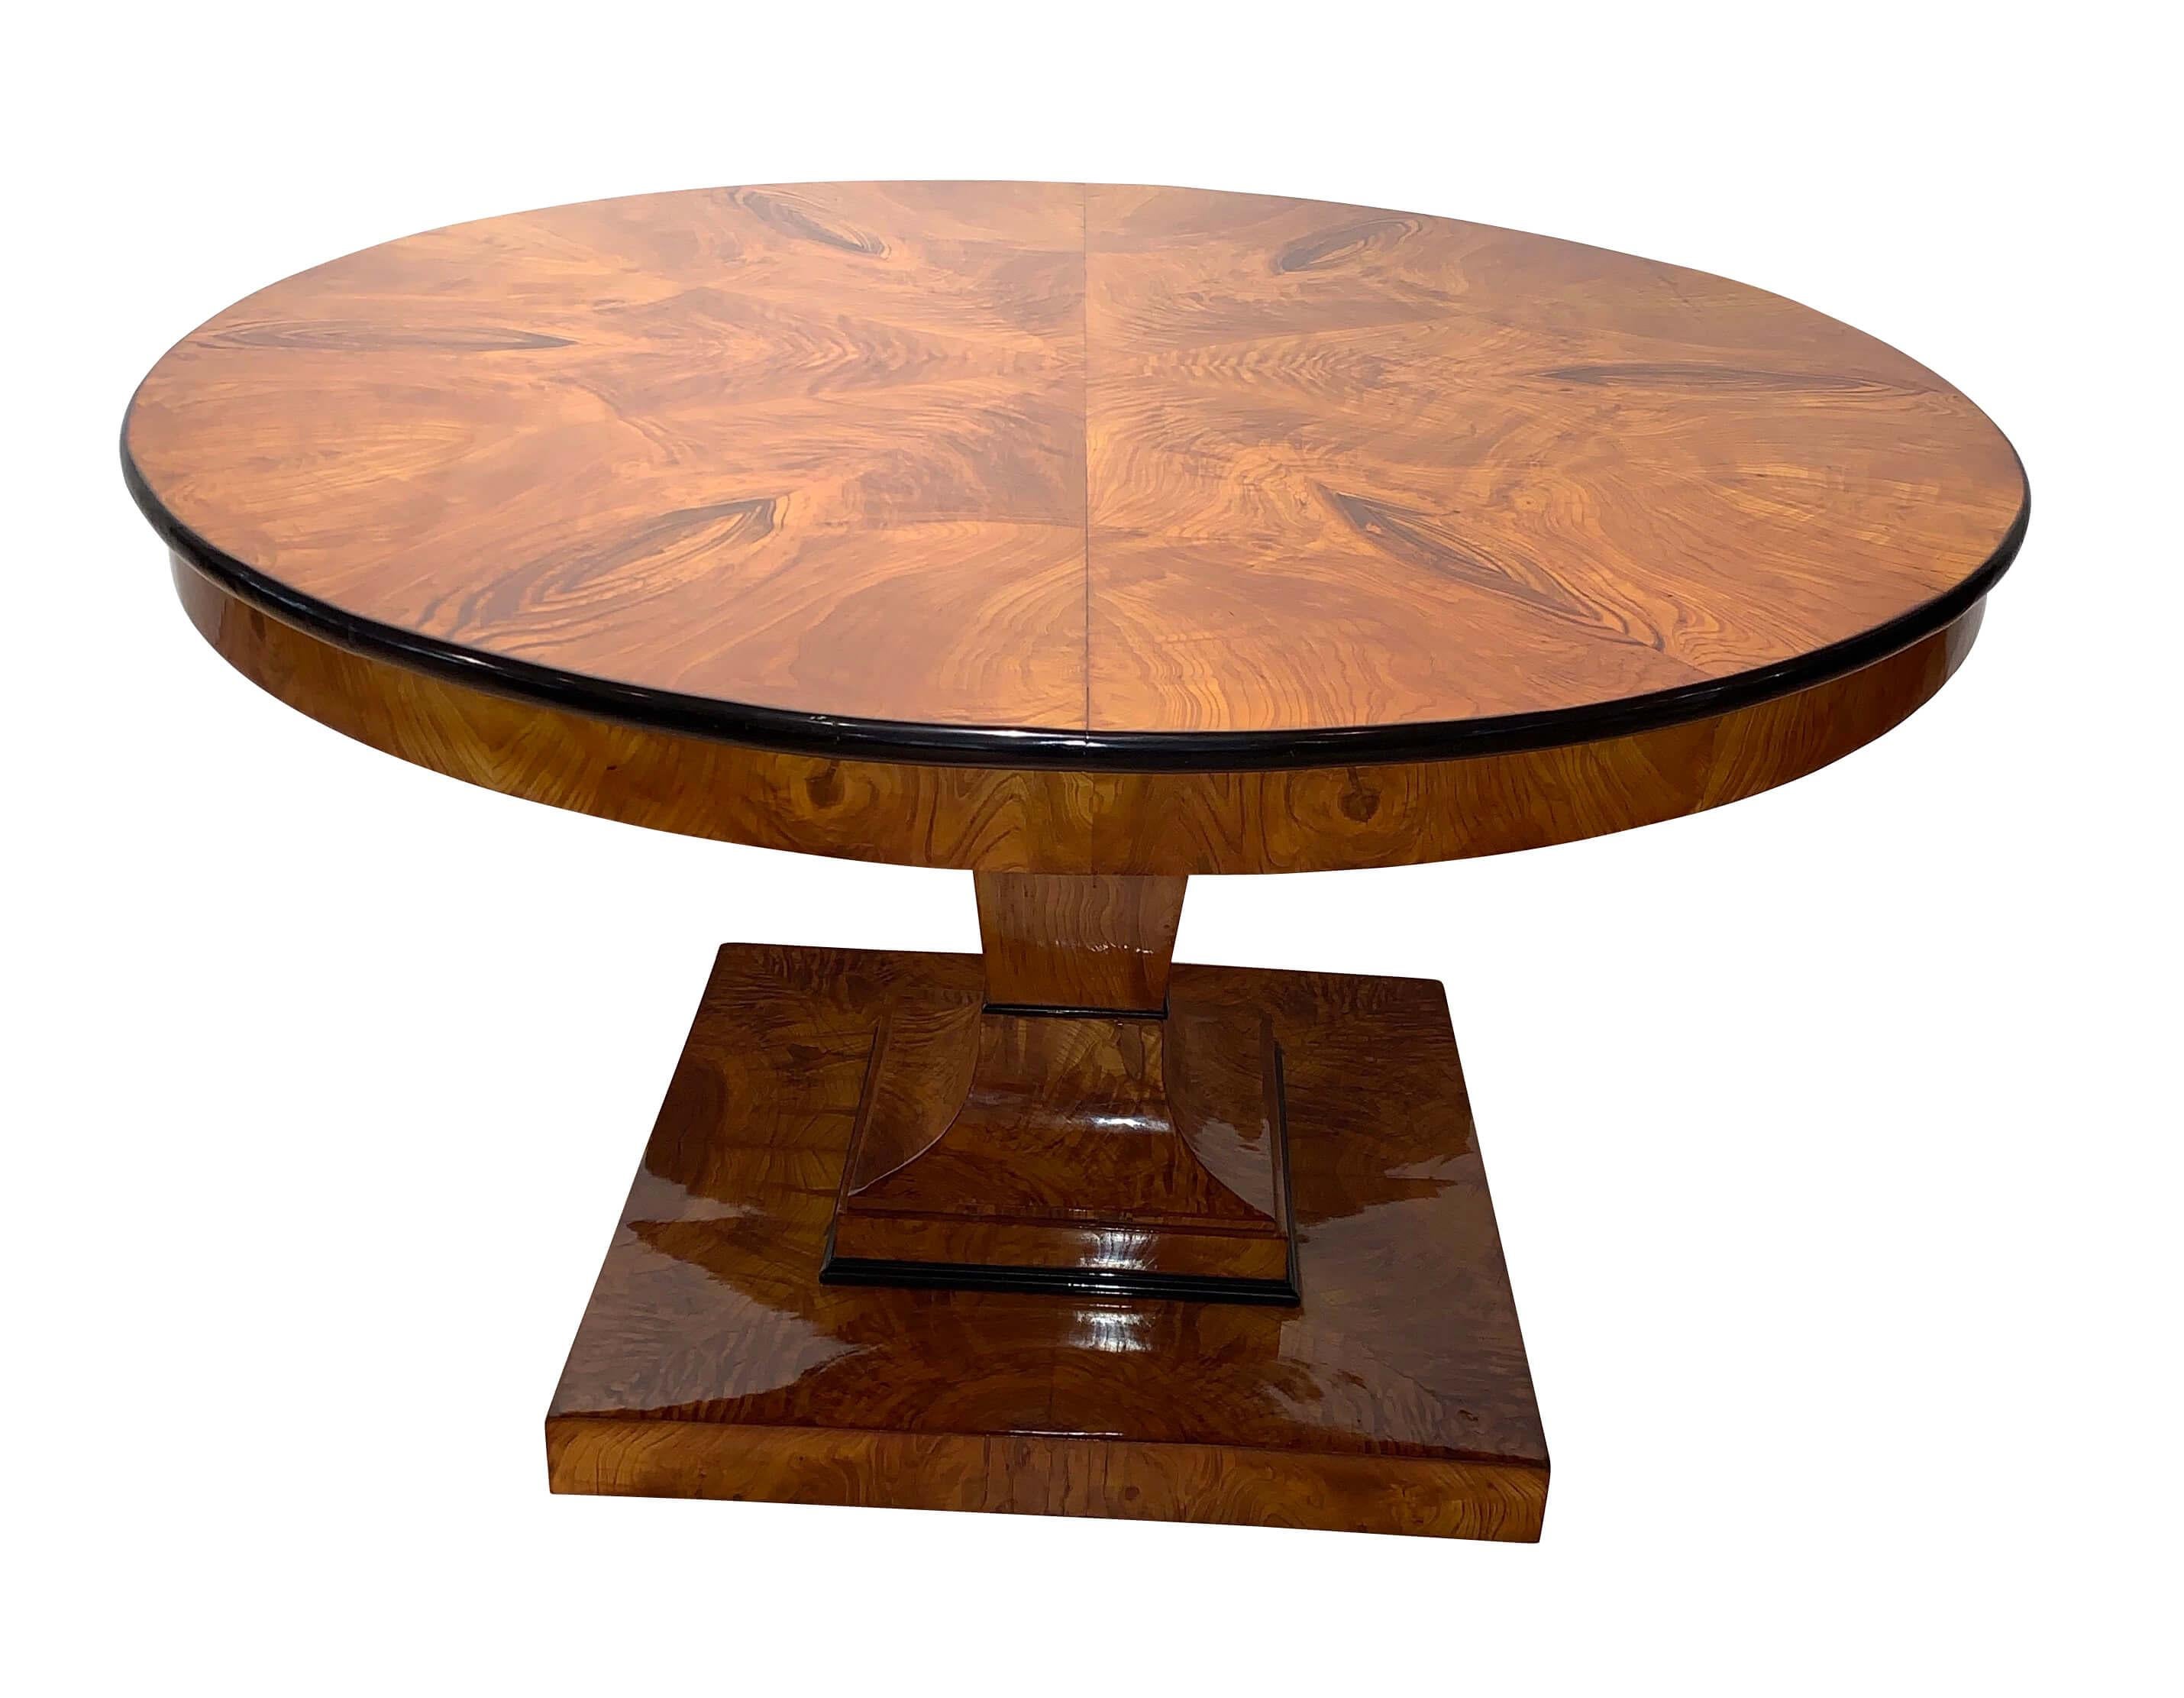 Original, big, round Biedermeier dining room table / saloon table from Vienna, circa 1825.

Wonderful ash veneer at the plate and apron, elaborately hand-polished with shellac. Edge of the plate has been ebonized and polished.
Lovely, well